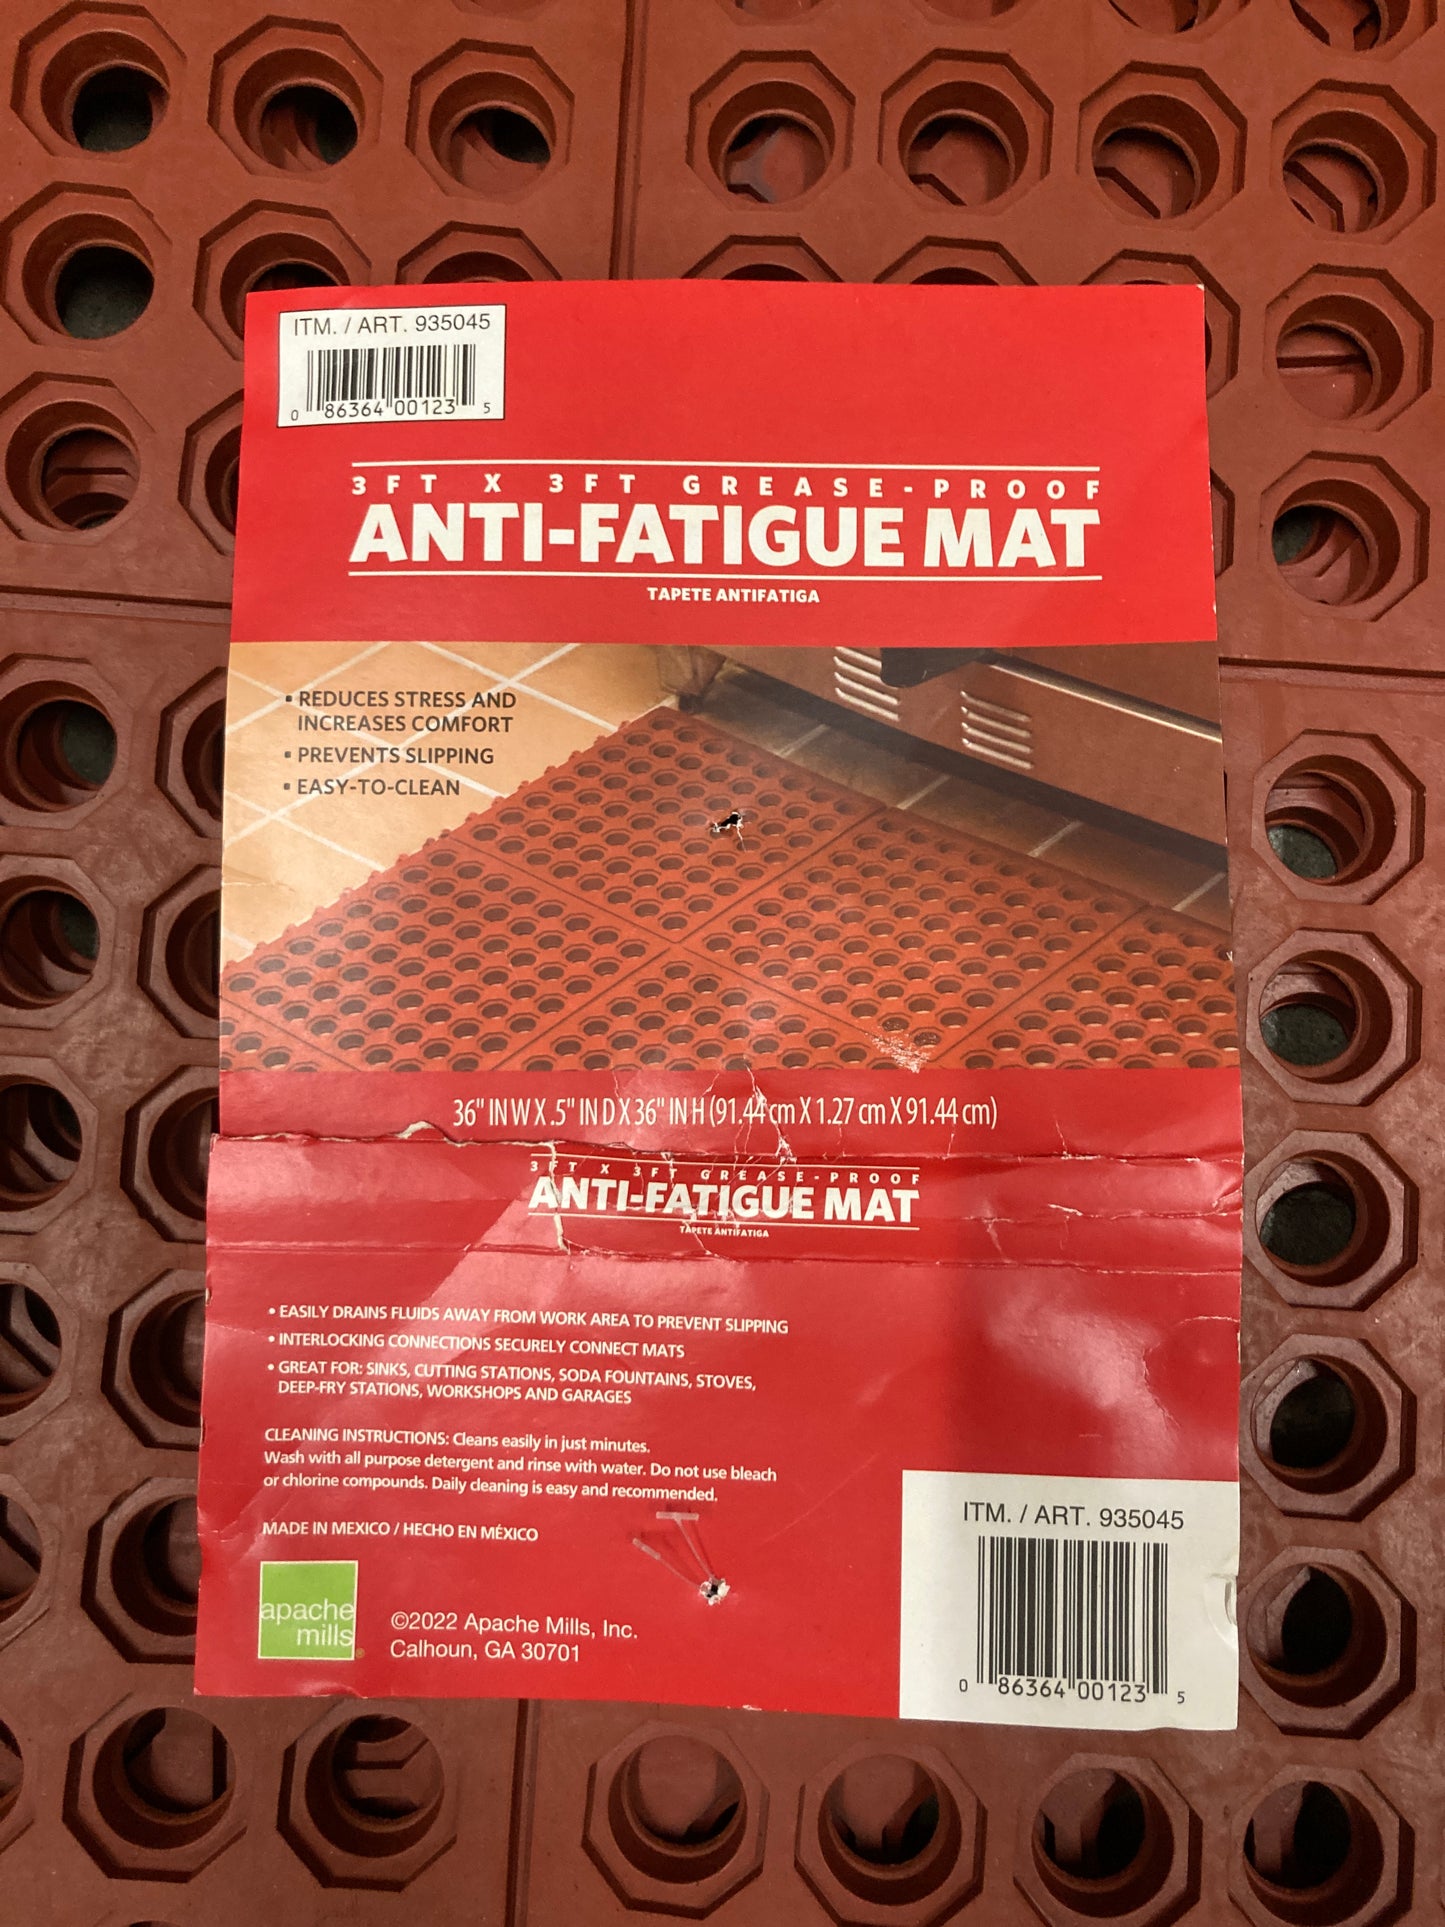 Costco - Apache Mills Performa Anti-Fatigue Grease-Proof Mat, 3’ x 3’, Red - Retail $29 Default Title